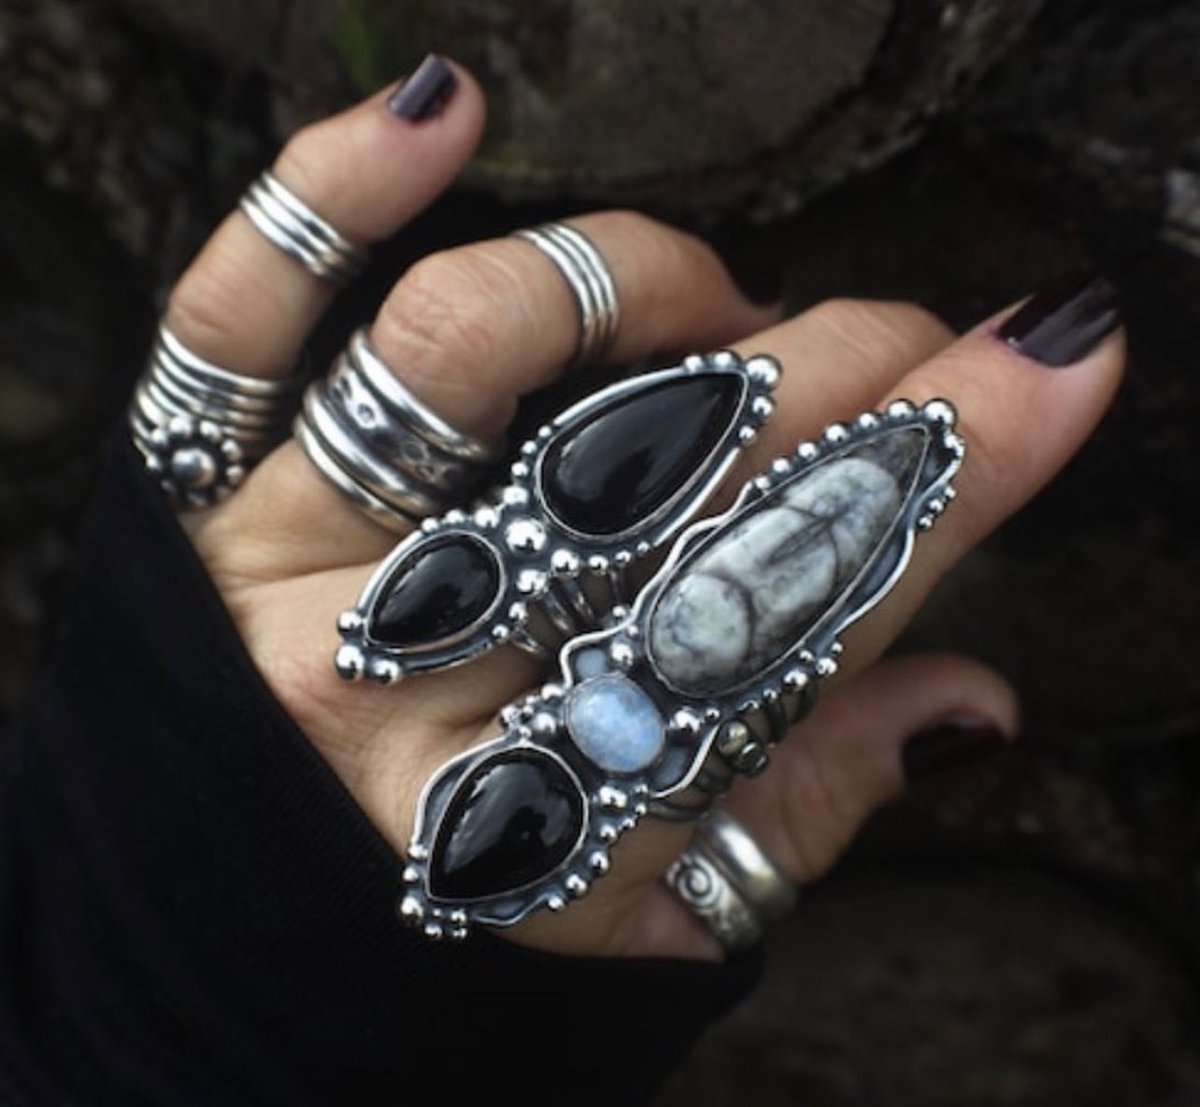 Indulge in Uniqueness | SterlingToLove

#uniquejewelry #jewelrystyle #gothic #witchy #rings #wearableart #artjewelry